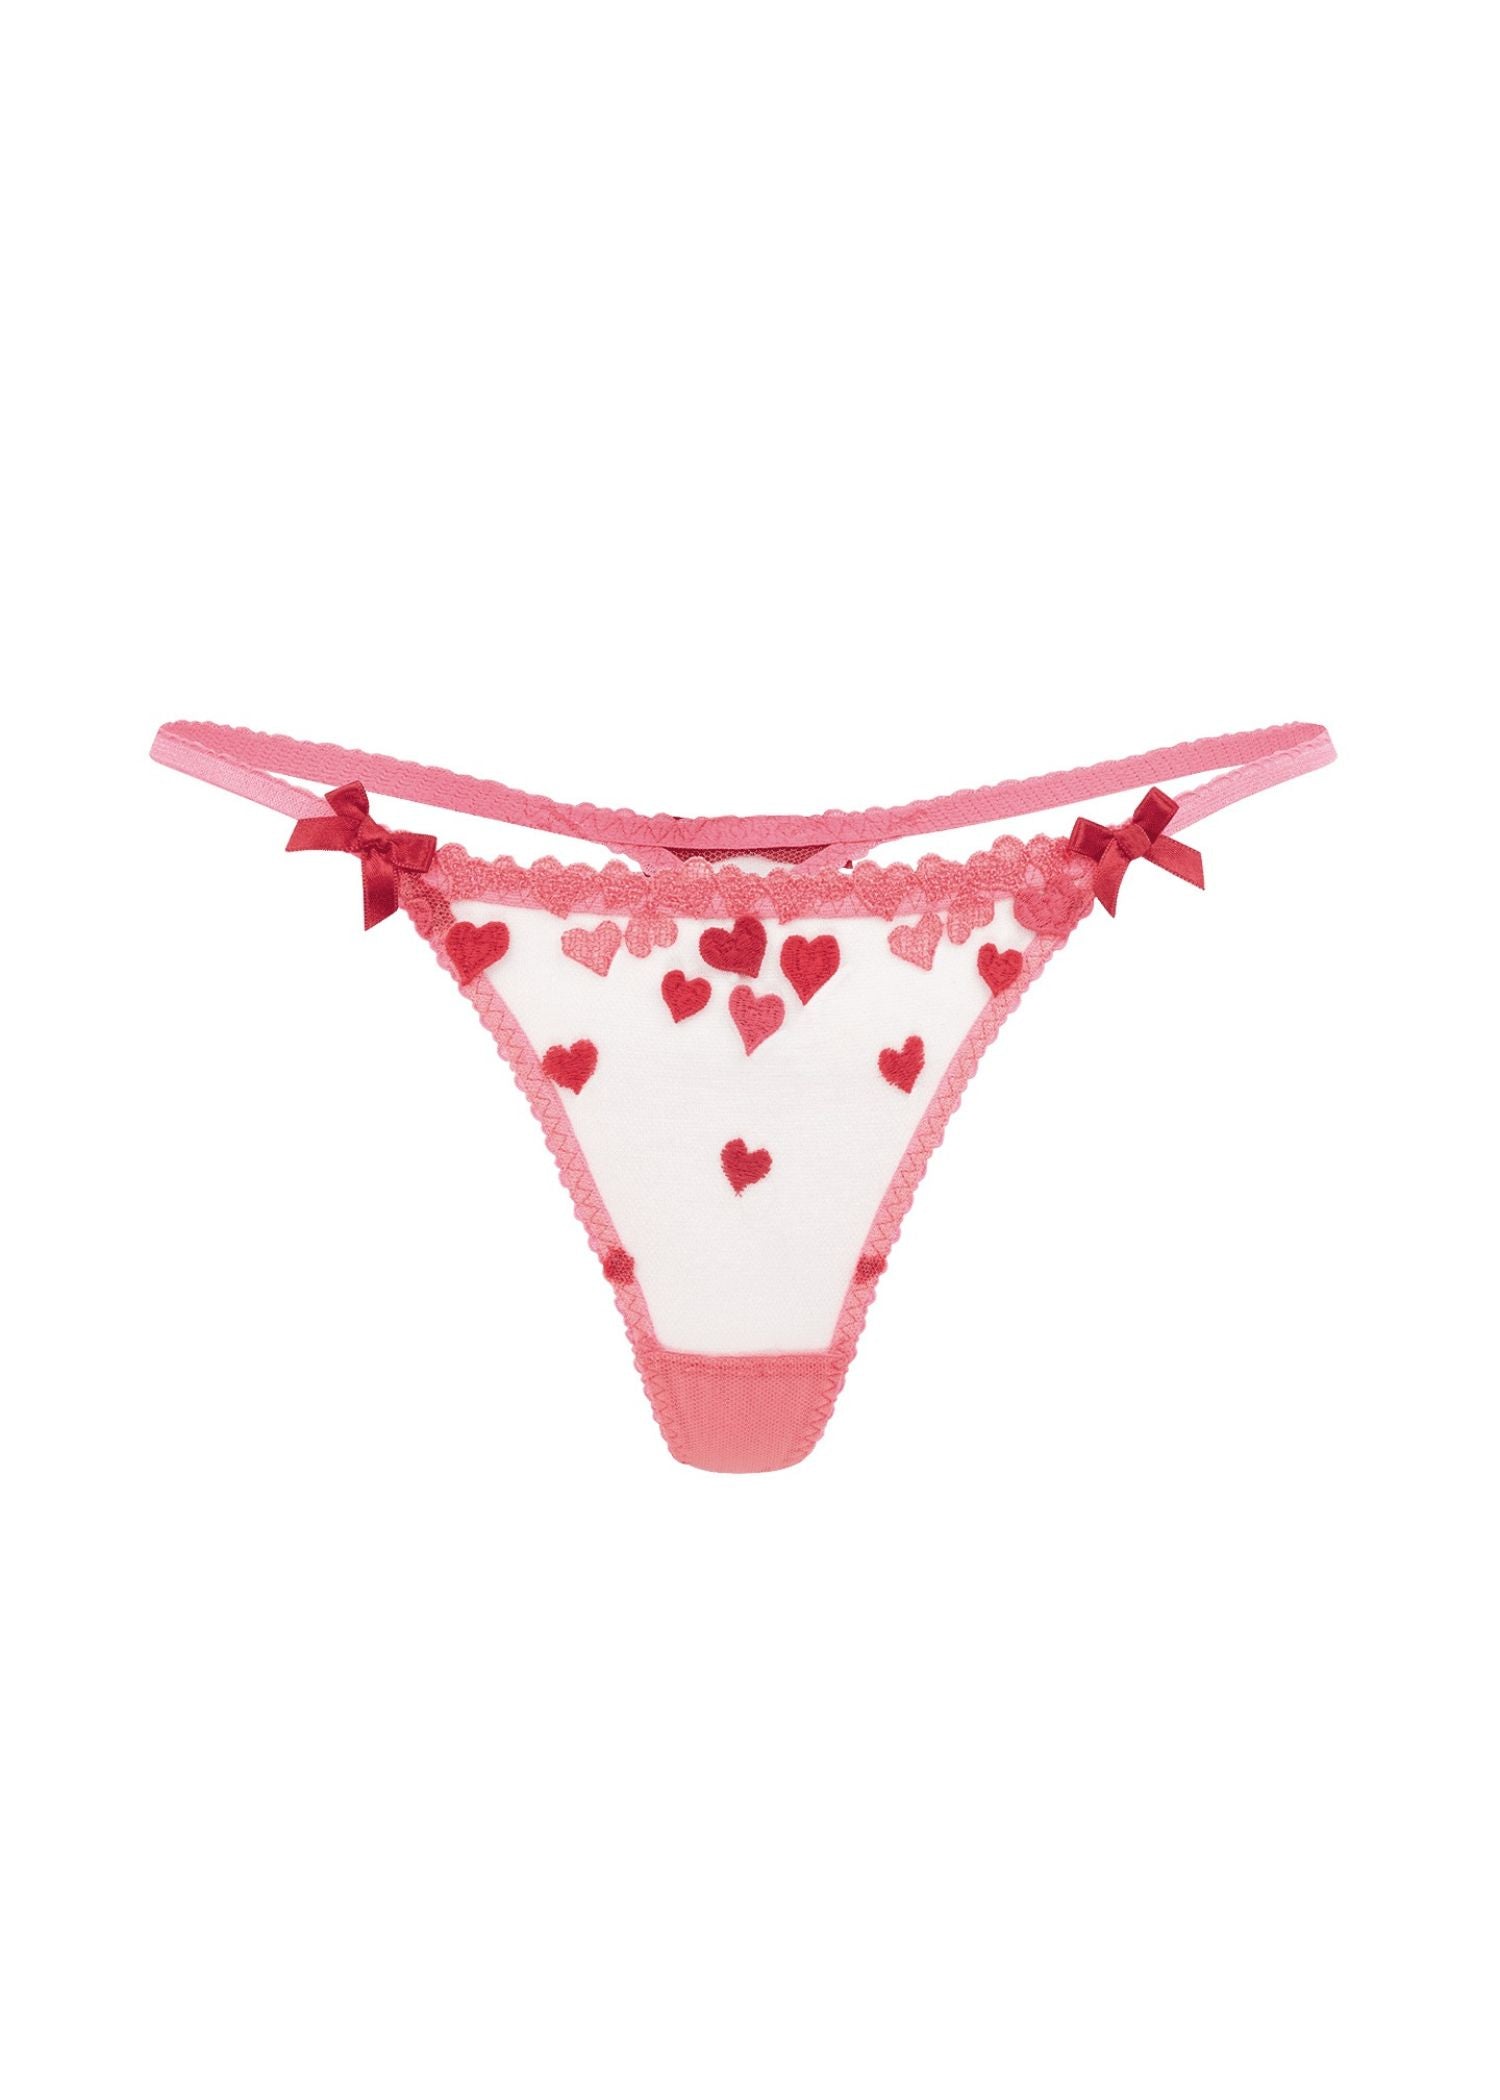 Agent Provocateur Cupid Thong (Red/Pink) | Avec Amour Lingerie